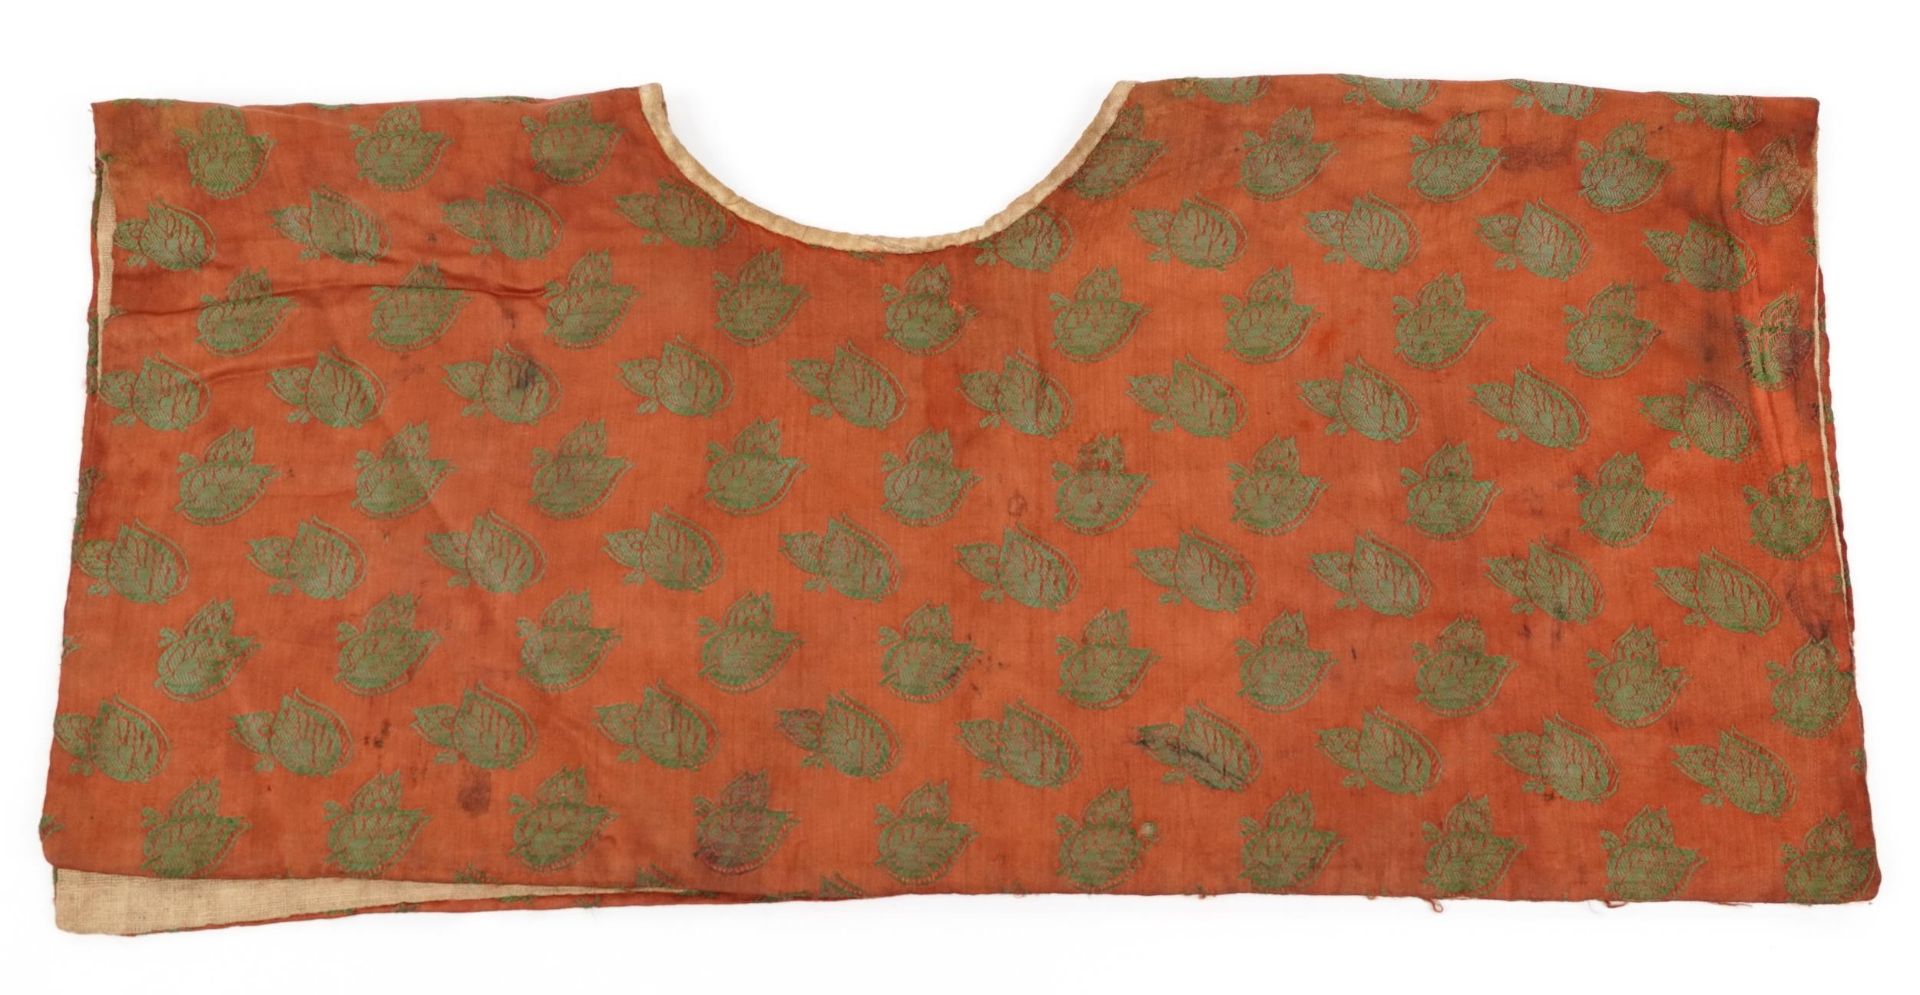 Early 18th century Turkish Ottoman barber's apron, 63cm x 60cm : For further information on this lot - Image 3 of 5